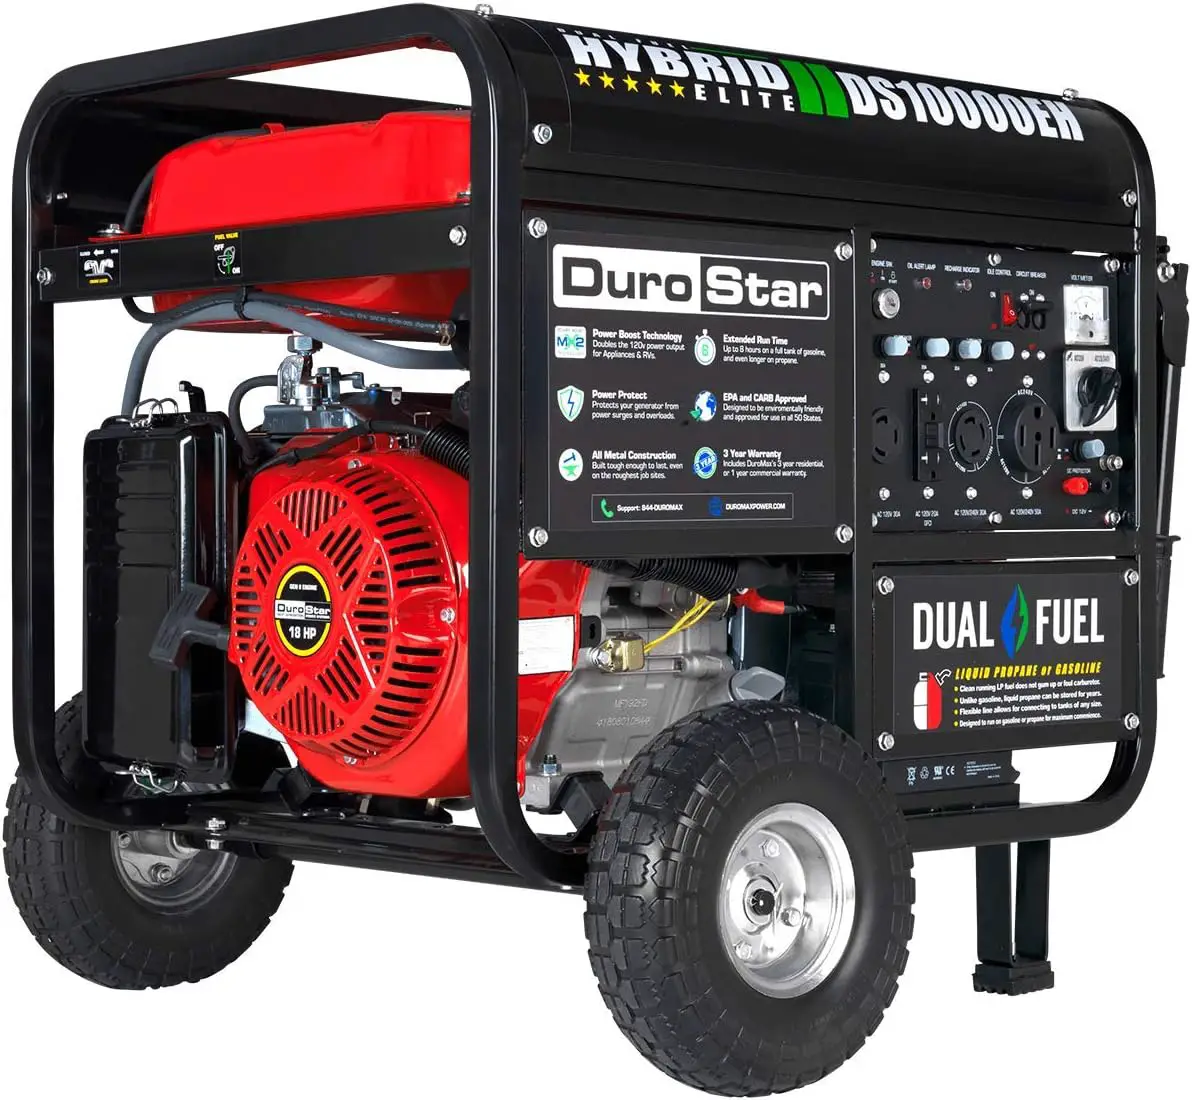 DuroStar DS10000EH: The Ultimate 10,000W Dual Fuel Generator